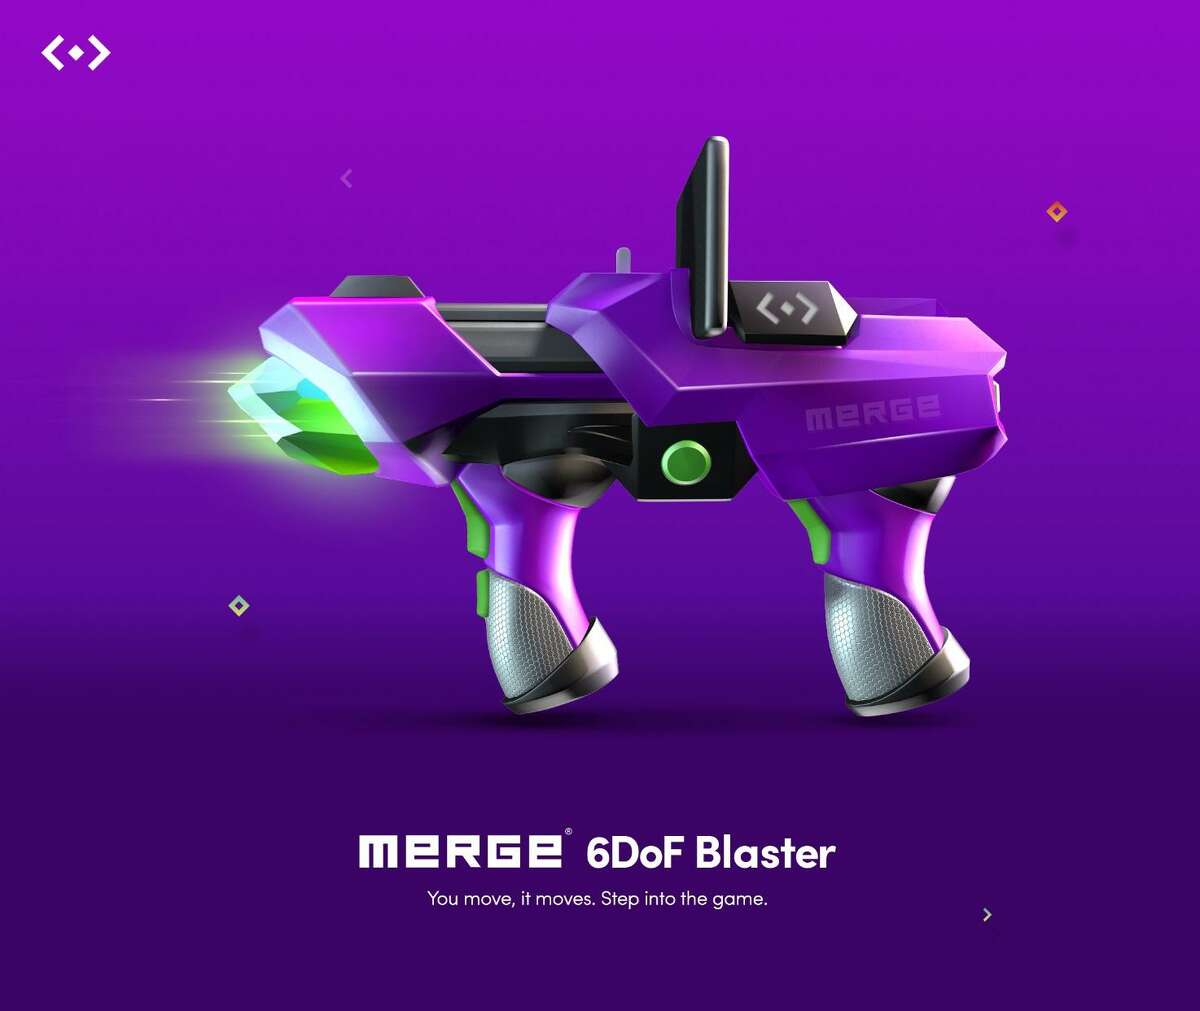 Merge unveiled Sunday its Merge 6DoF Blaster, which is expected to hit the shelves this summer.